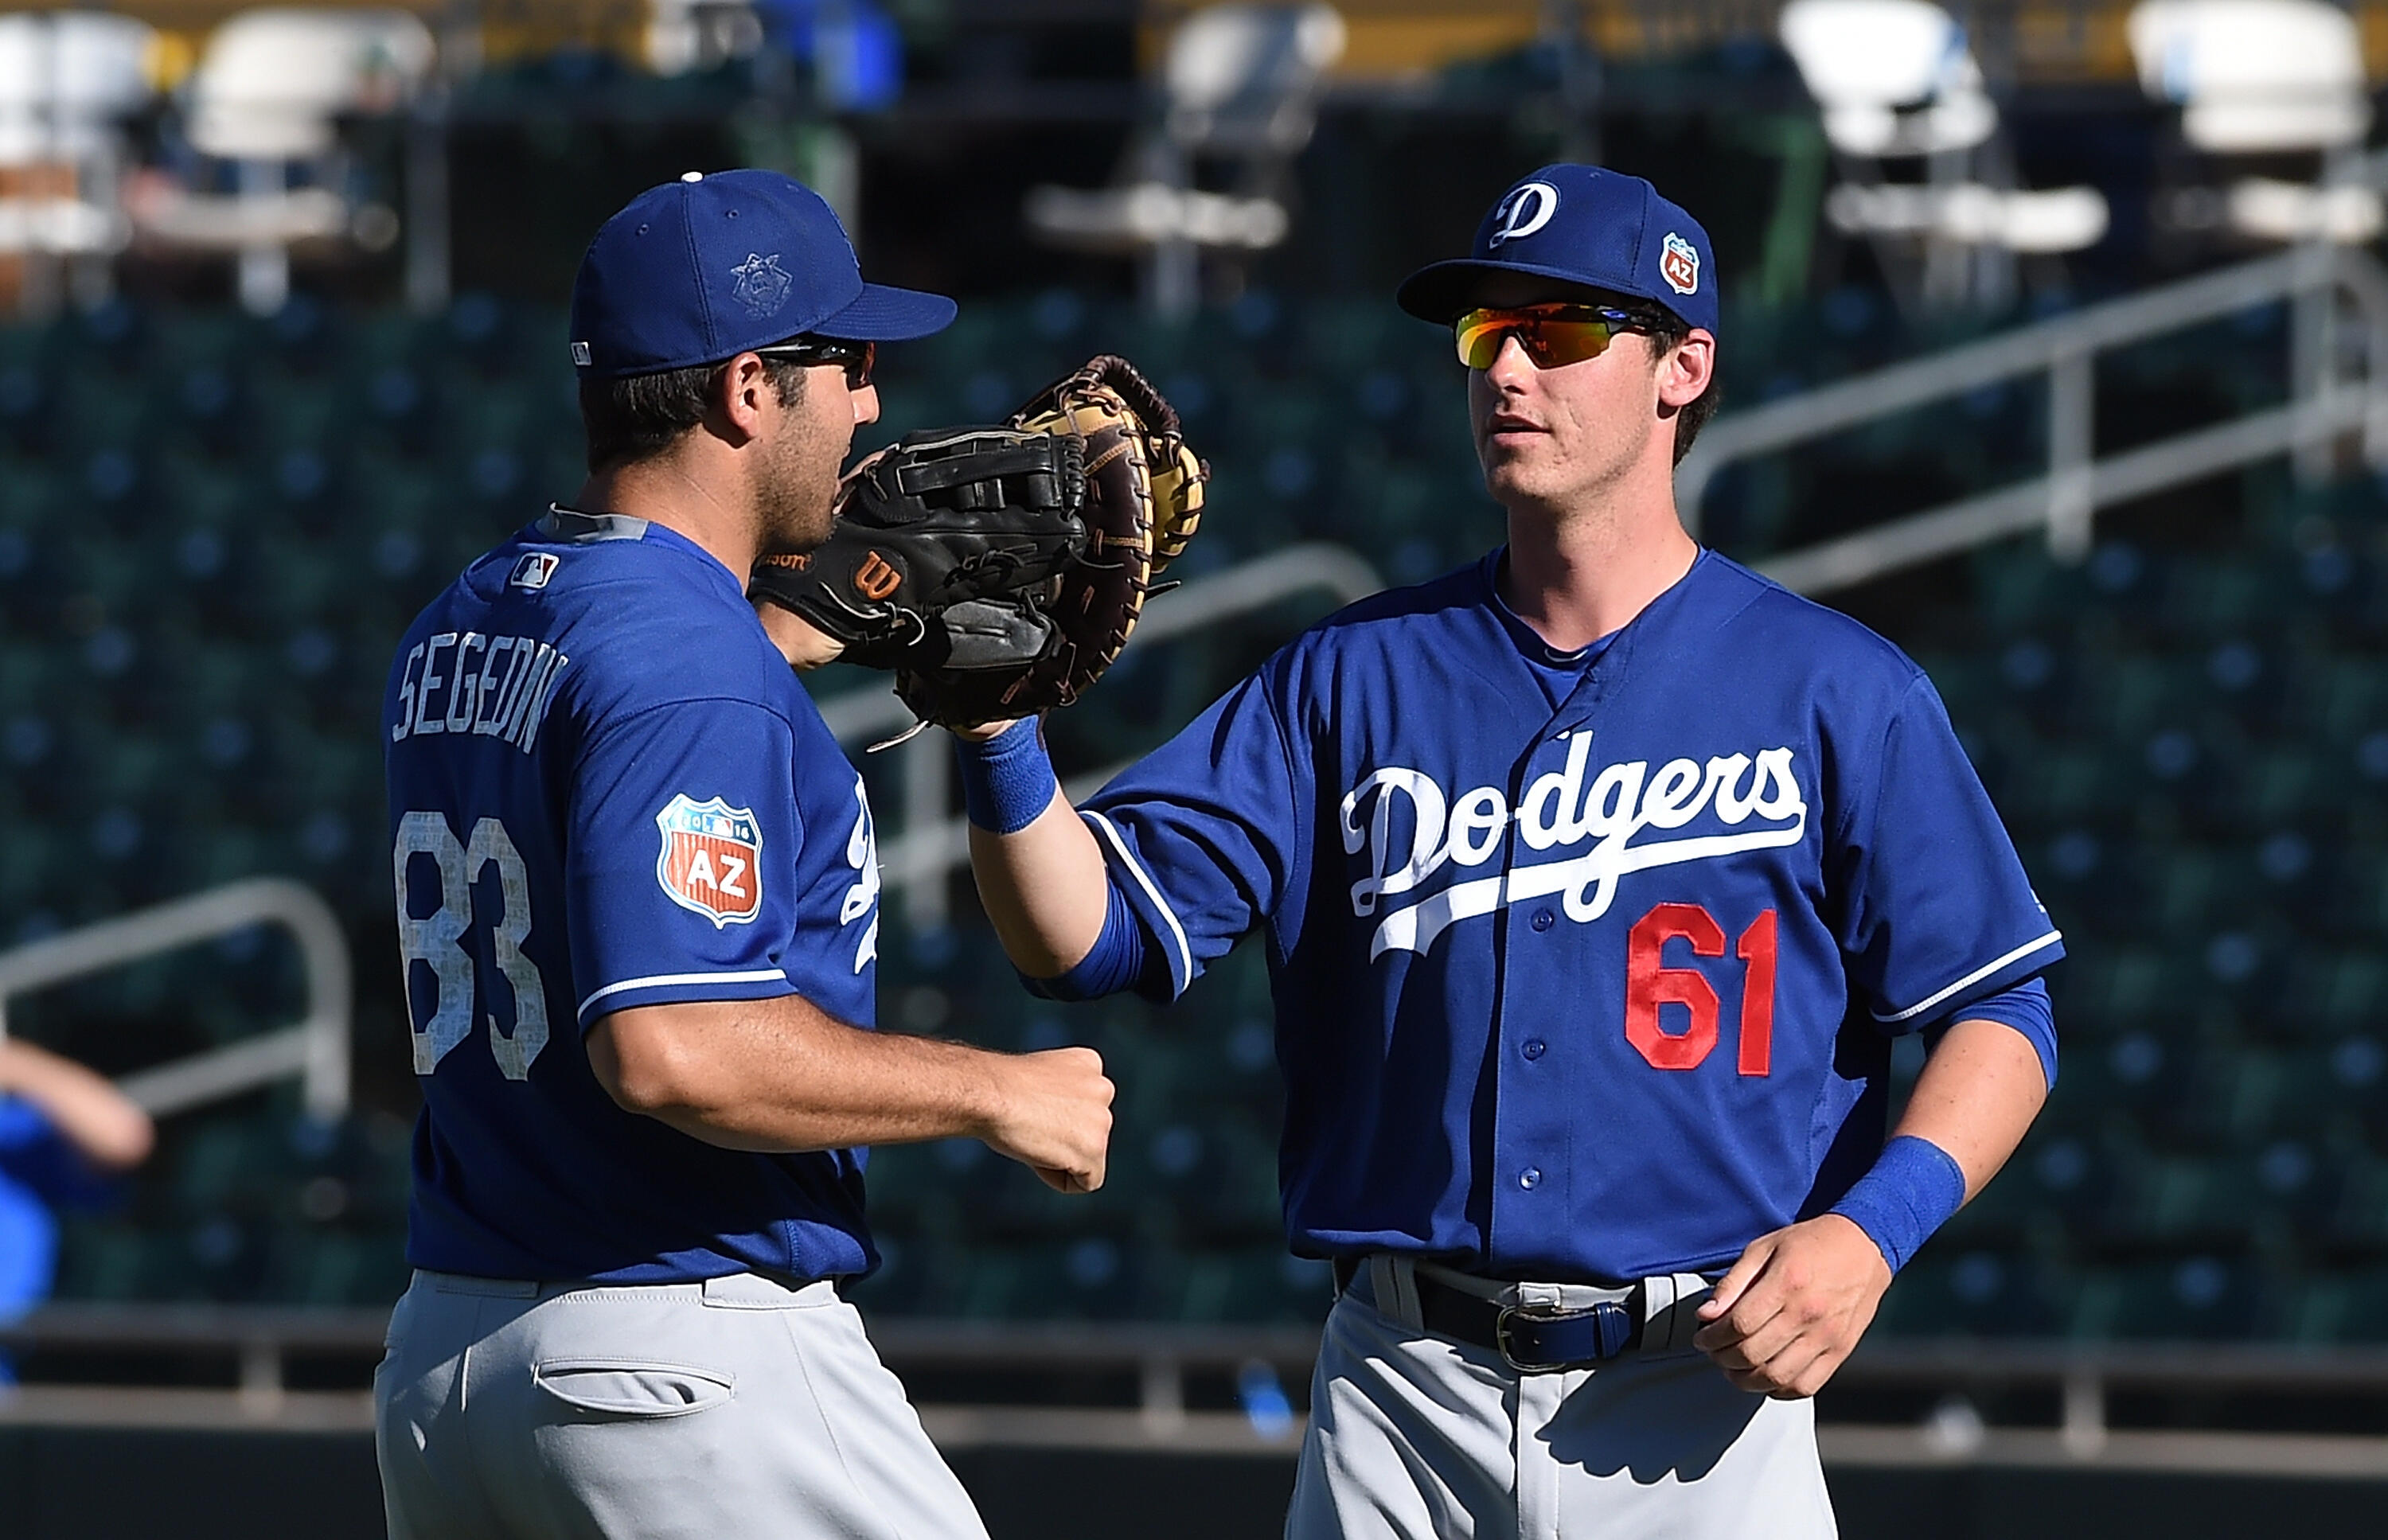 MESA, AZ - MARCH 10:  Rob Segedin #83 and teammate Cody Bellinger #61 of the Los Angeles Dodgers celebrate an 8-3 win against the Oakland Athletics at HoHoKam Stadium on March 10, 2016 in Mesa, Arizona.  (Photo by Norm Hall/Getty Images)